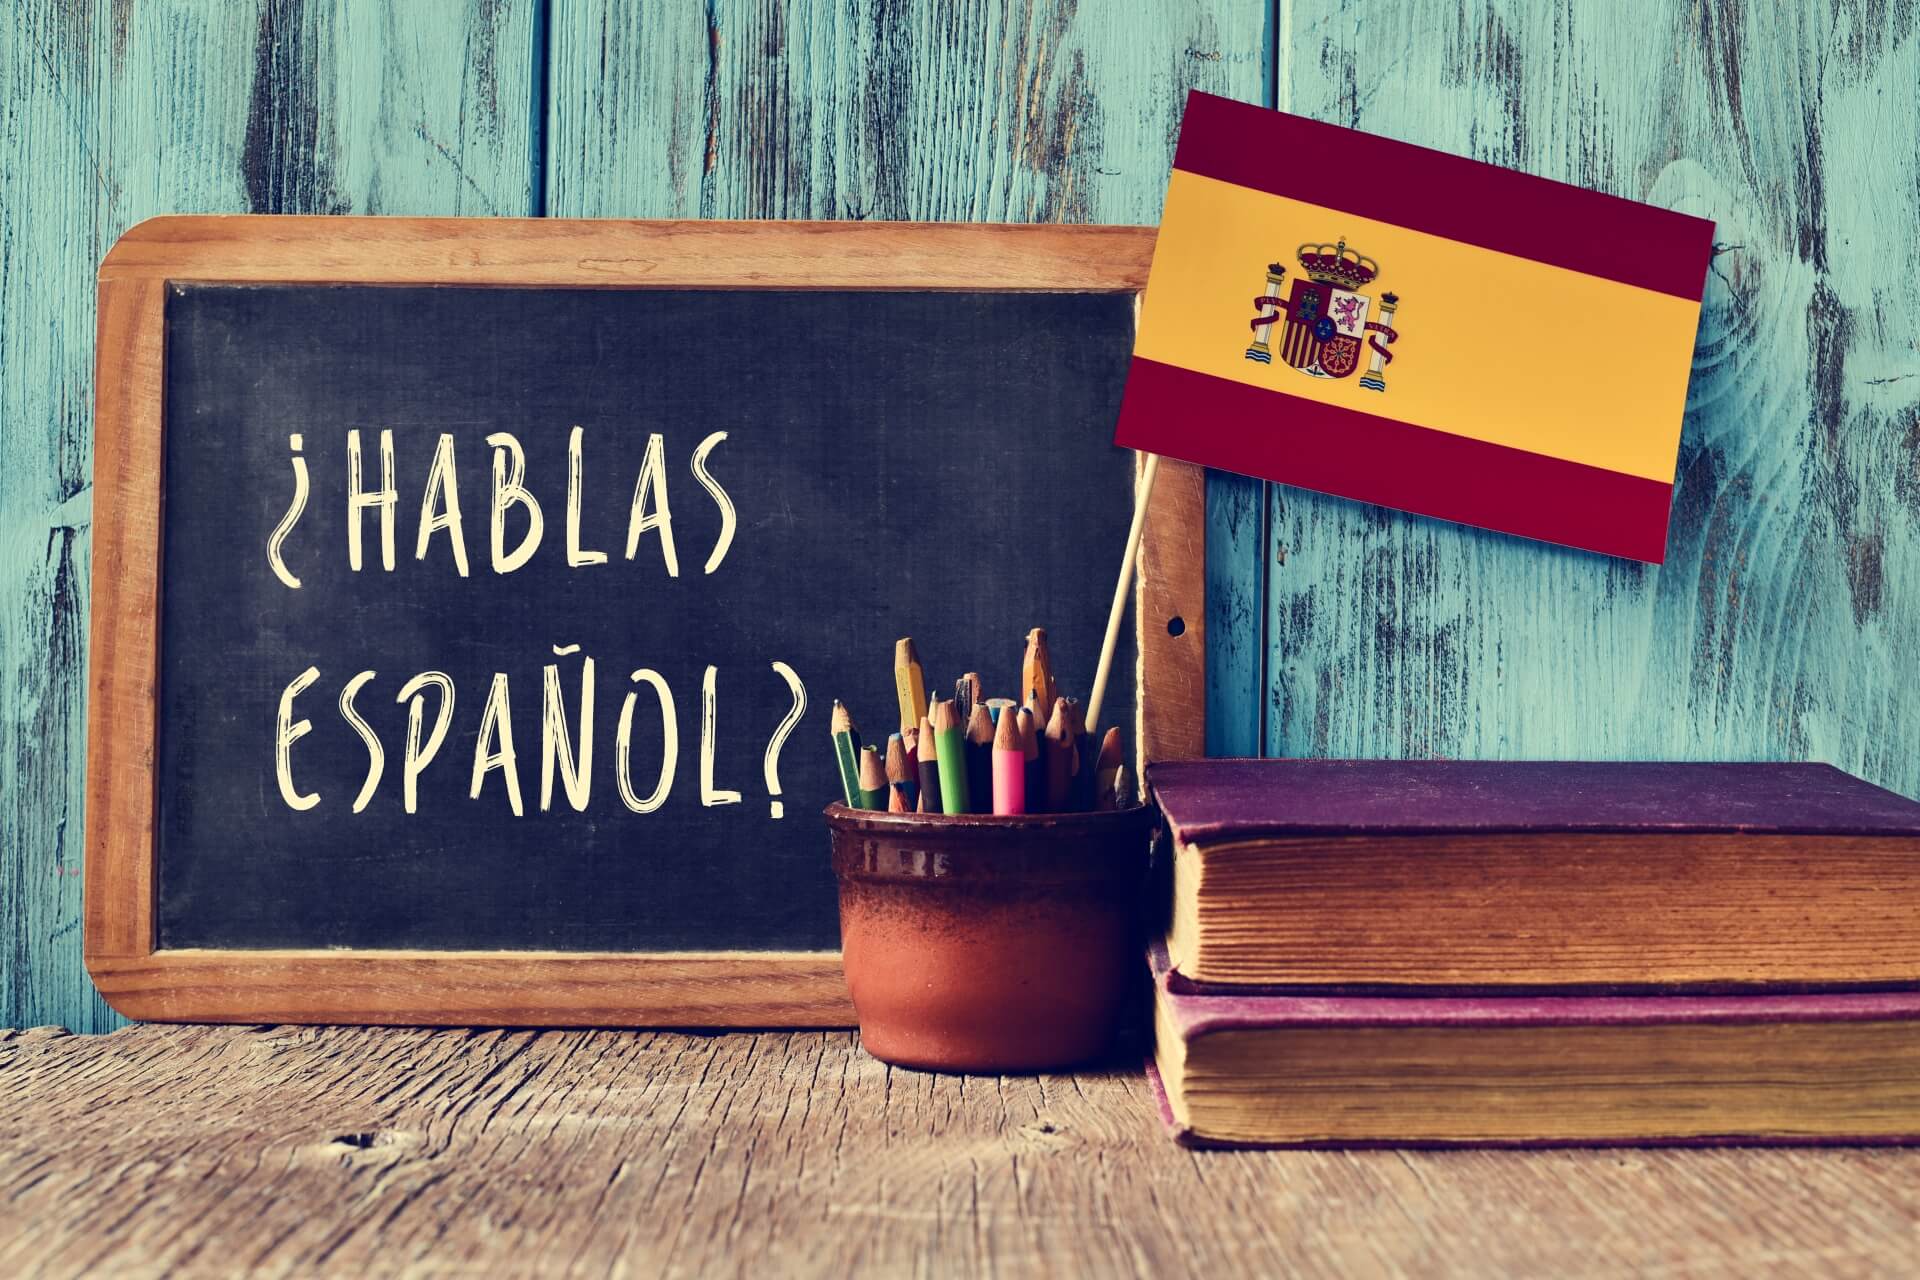 26 interesting facts about Spanish